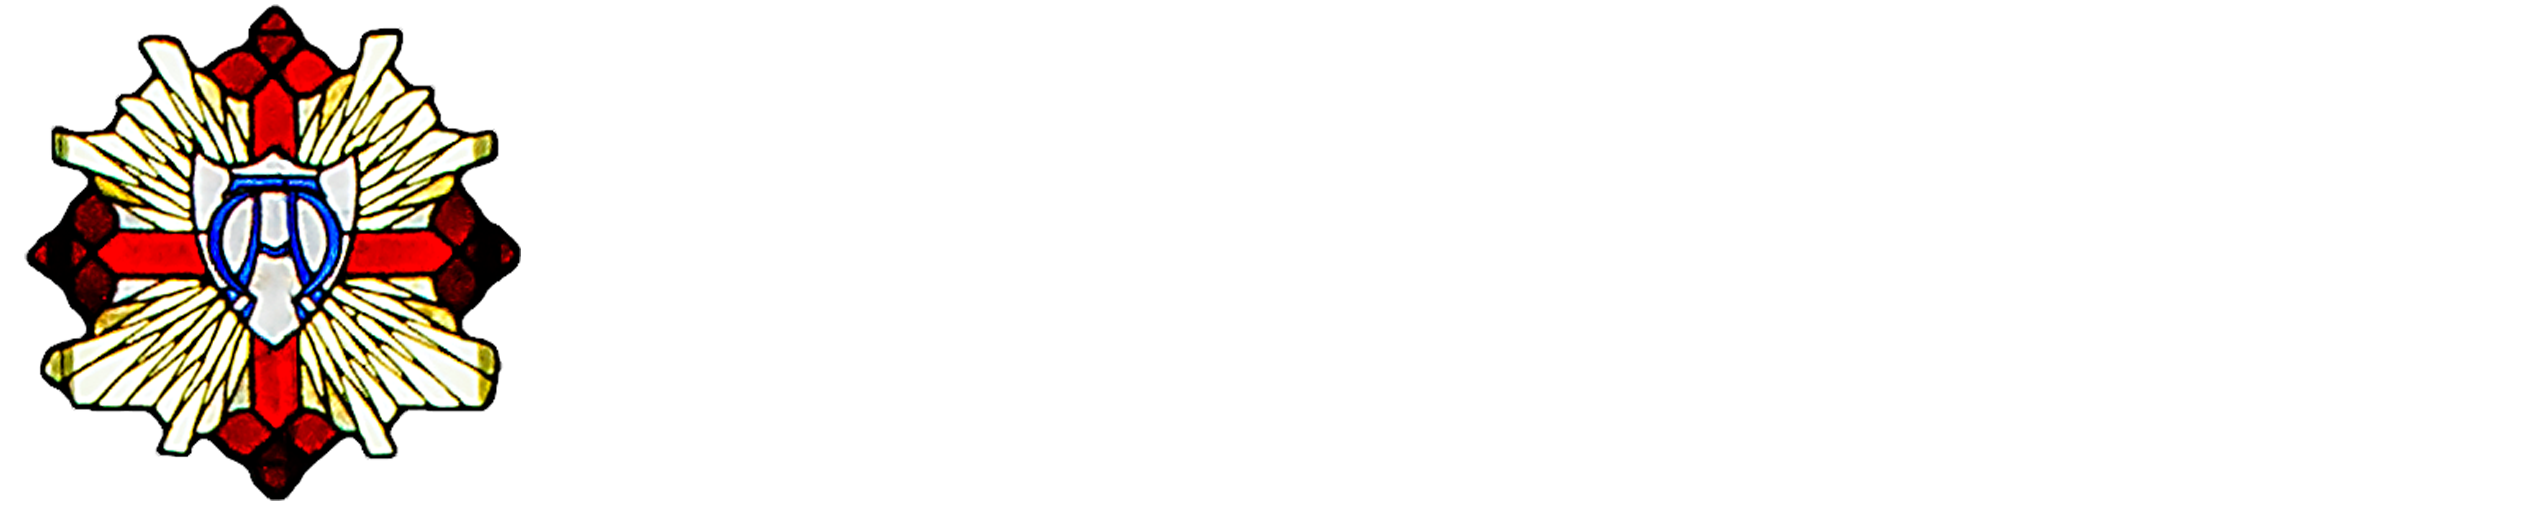 The Lutheran Church of Our Blessed Savior